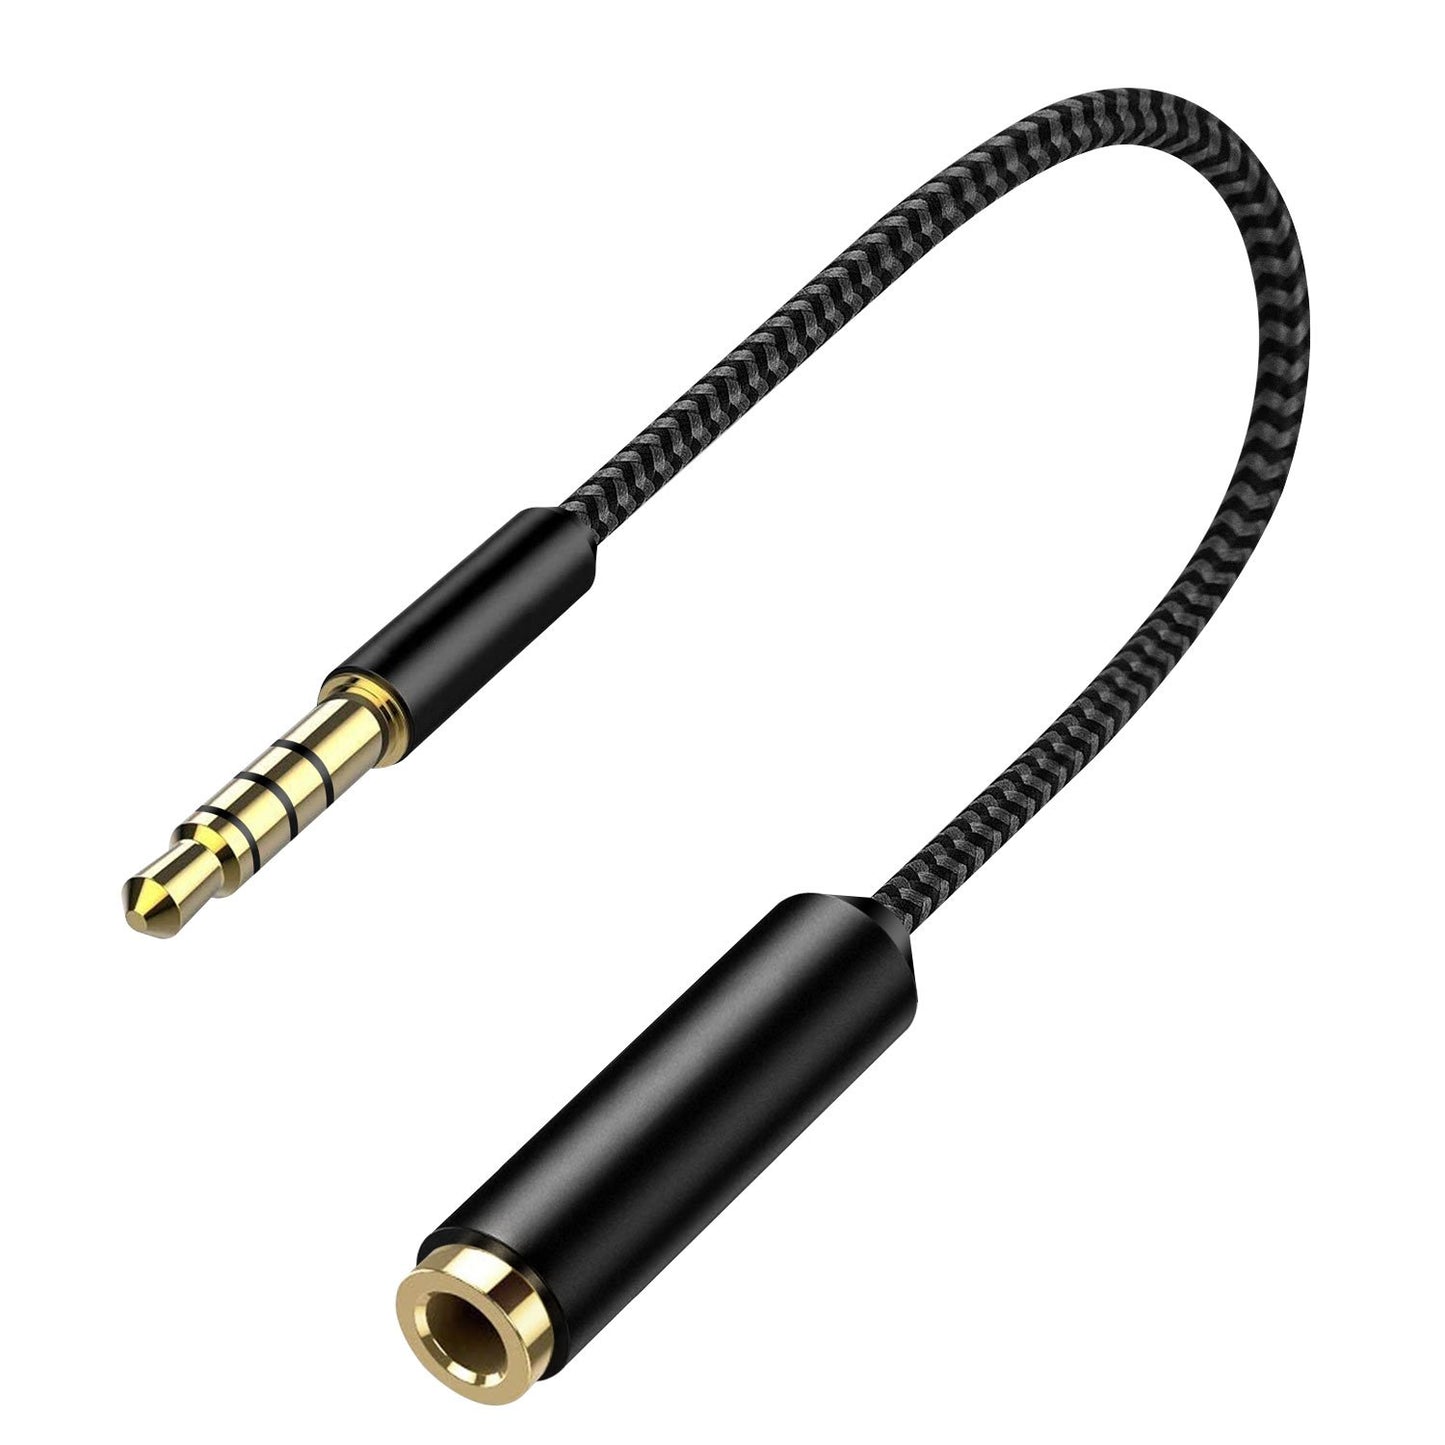 CNIPHONEBK - Cellet 6 Inch Gold Plated 3.5mm TRRS Male to Female Audio Adapter for Mobile Credit Card Reader, Headphones, Audio Aux, Car Stereo - Black